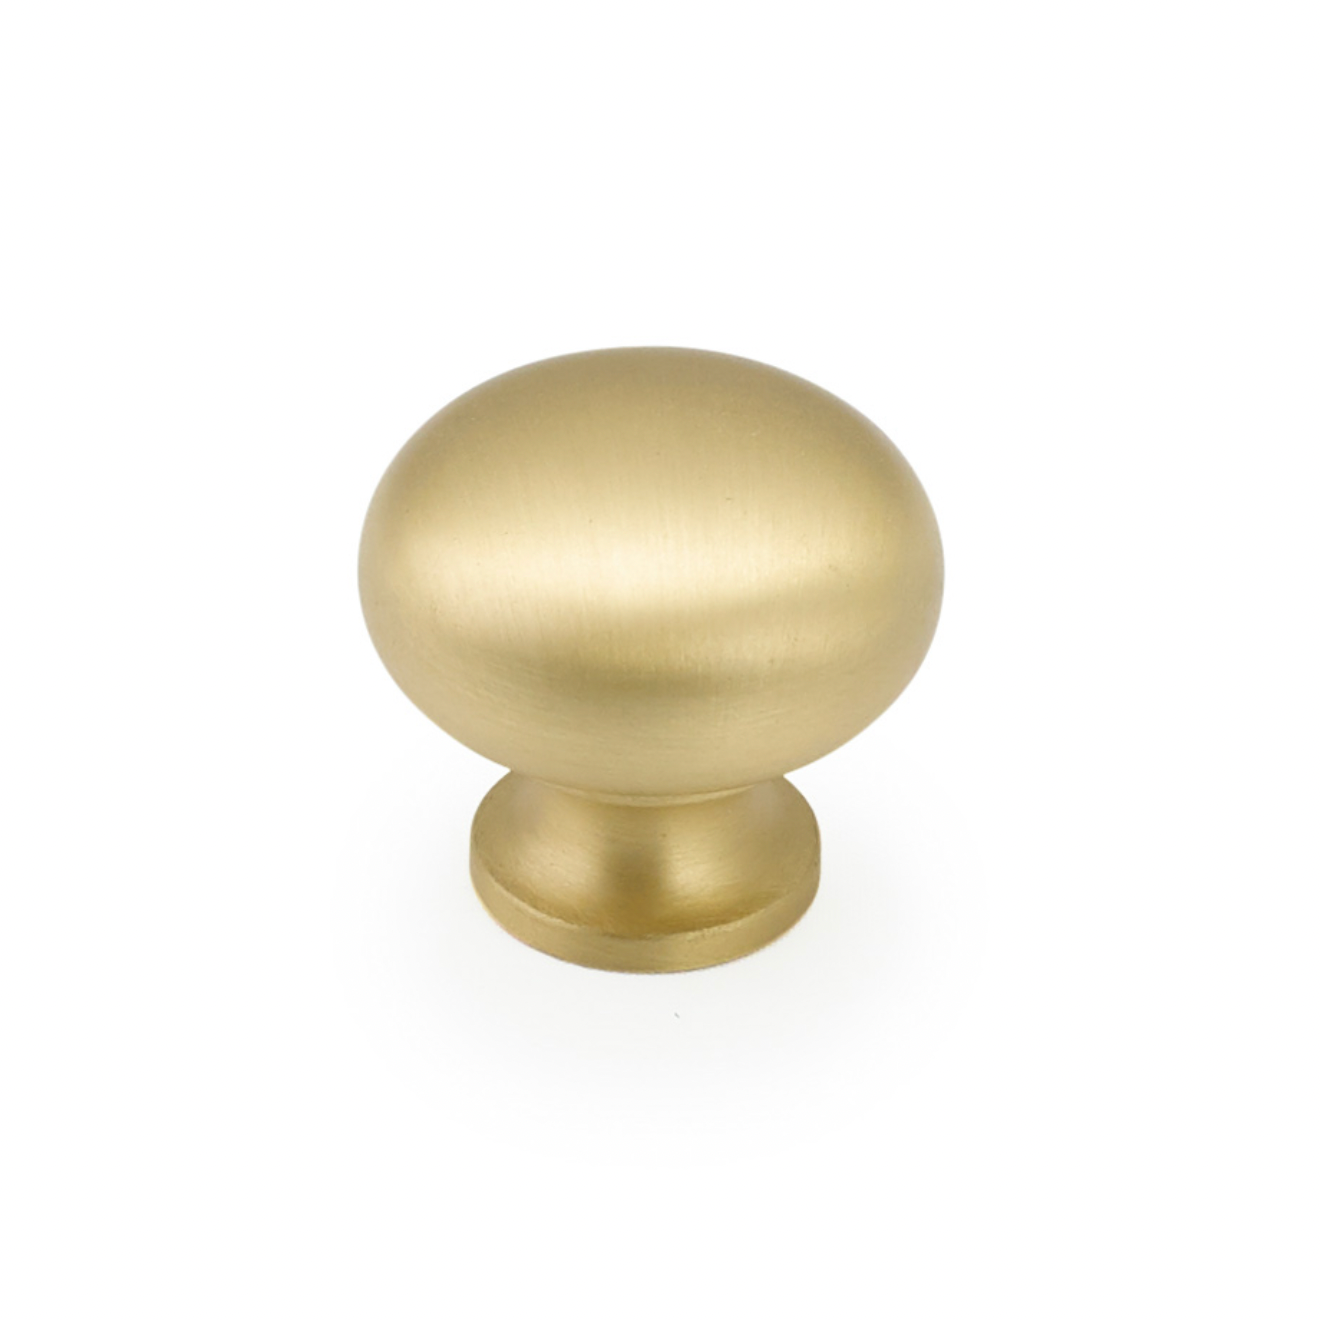 Satin Brass Drawer Pulls "Leah" Handles and Cup Pulls - Forge Hardware Studio